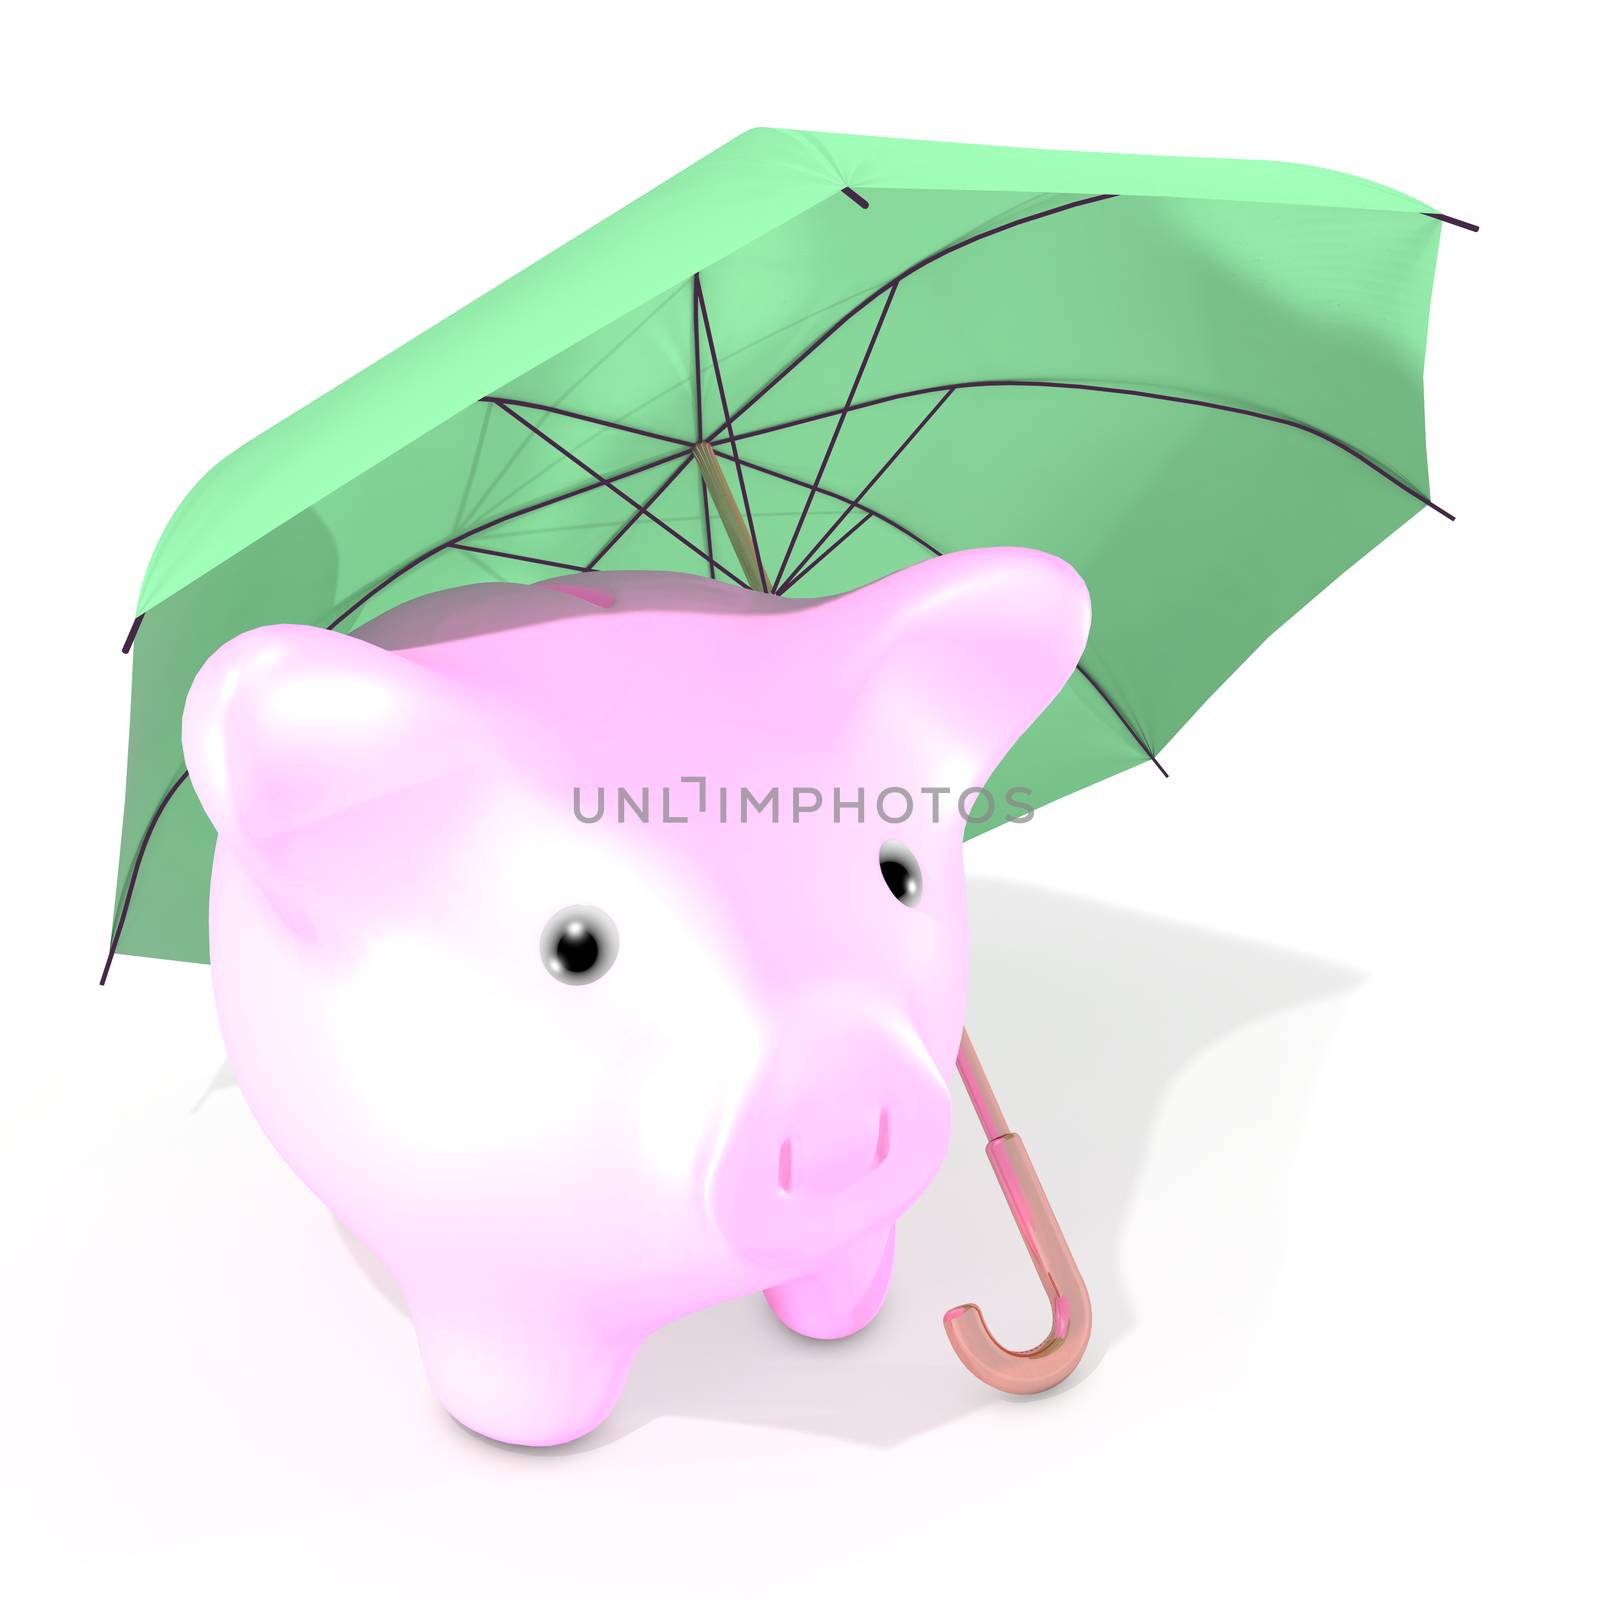 The illustration shows an umbrella protecting a little piggy bank against possible troubles linked to the market price fall.